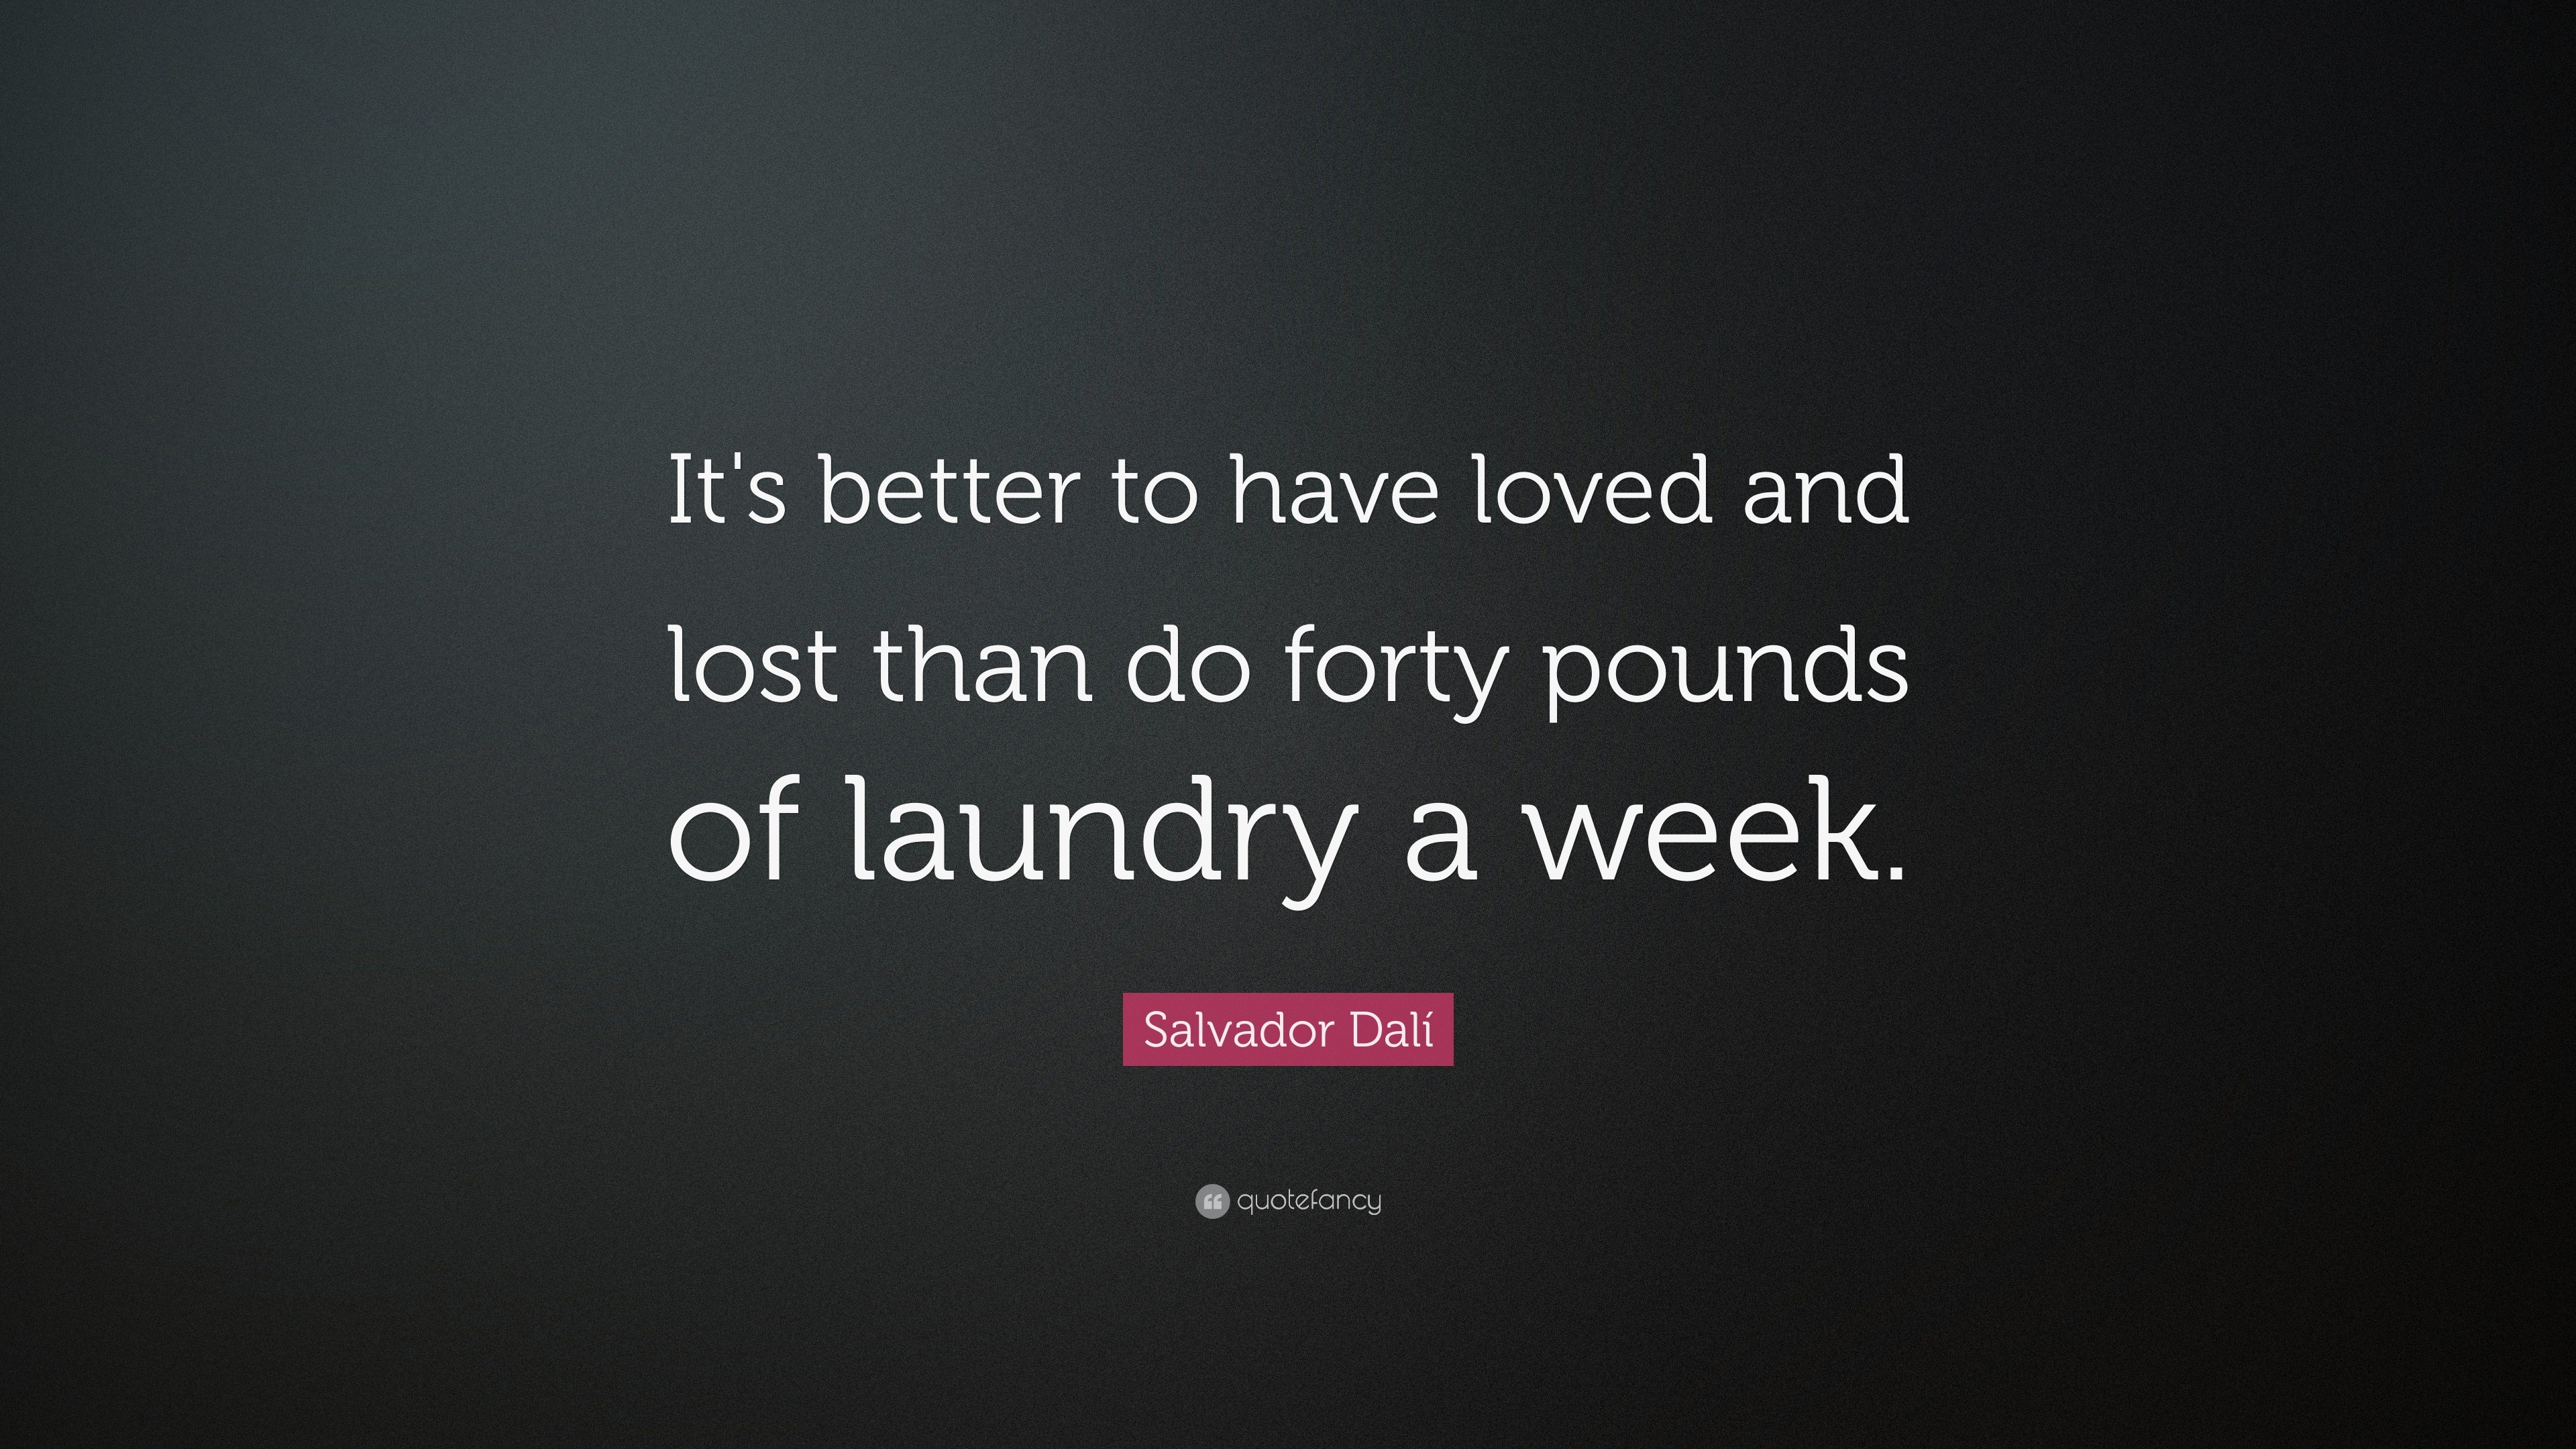 Salvador Dal­ Quote “It s better to have loved and lost than do forty pounds